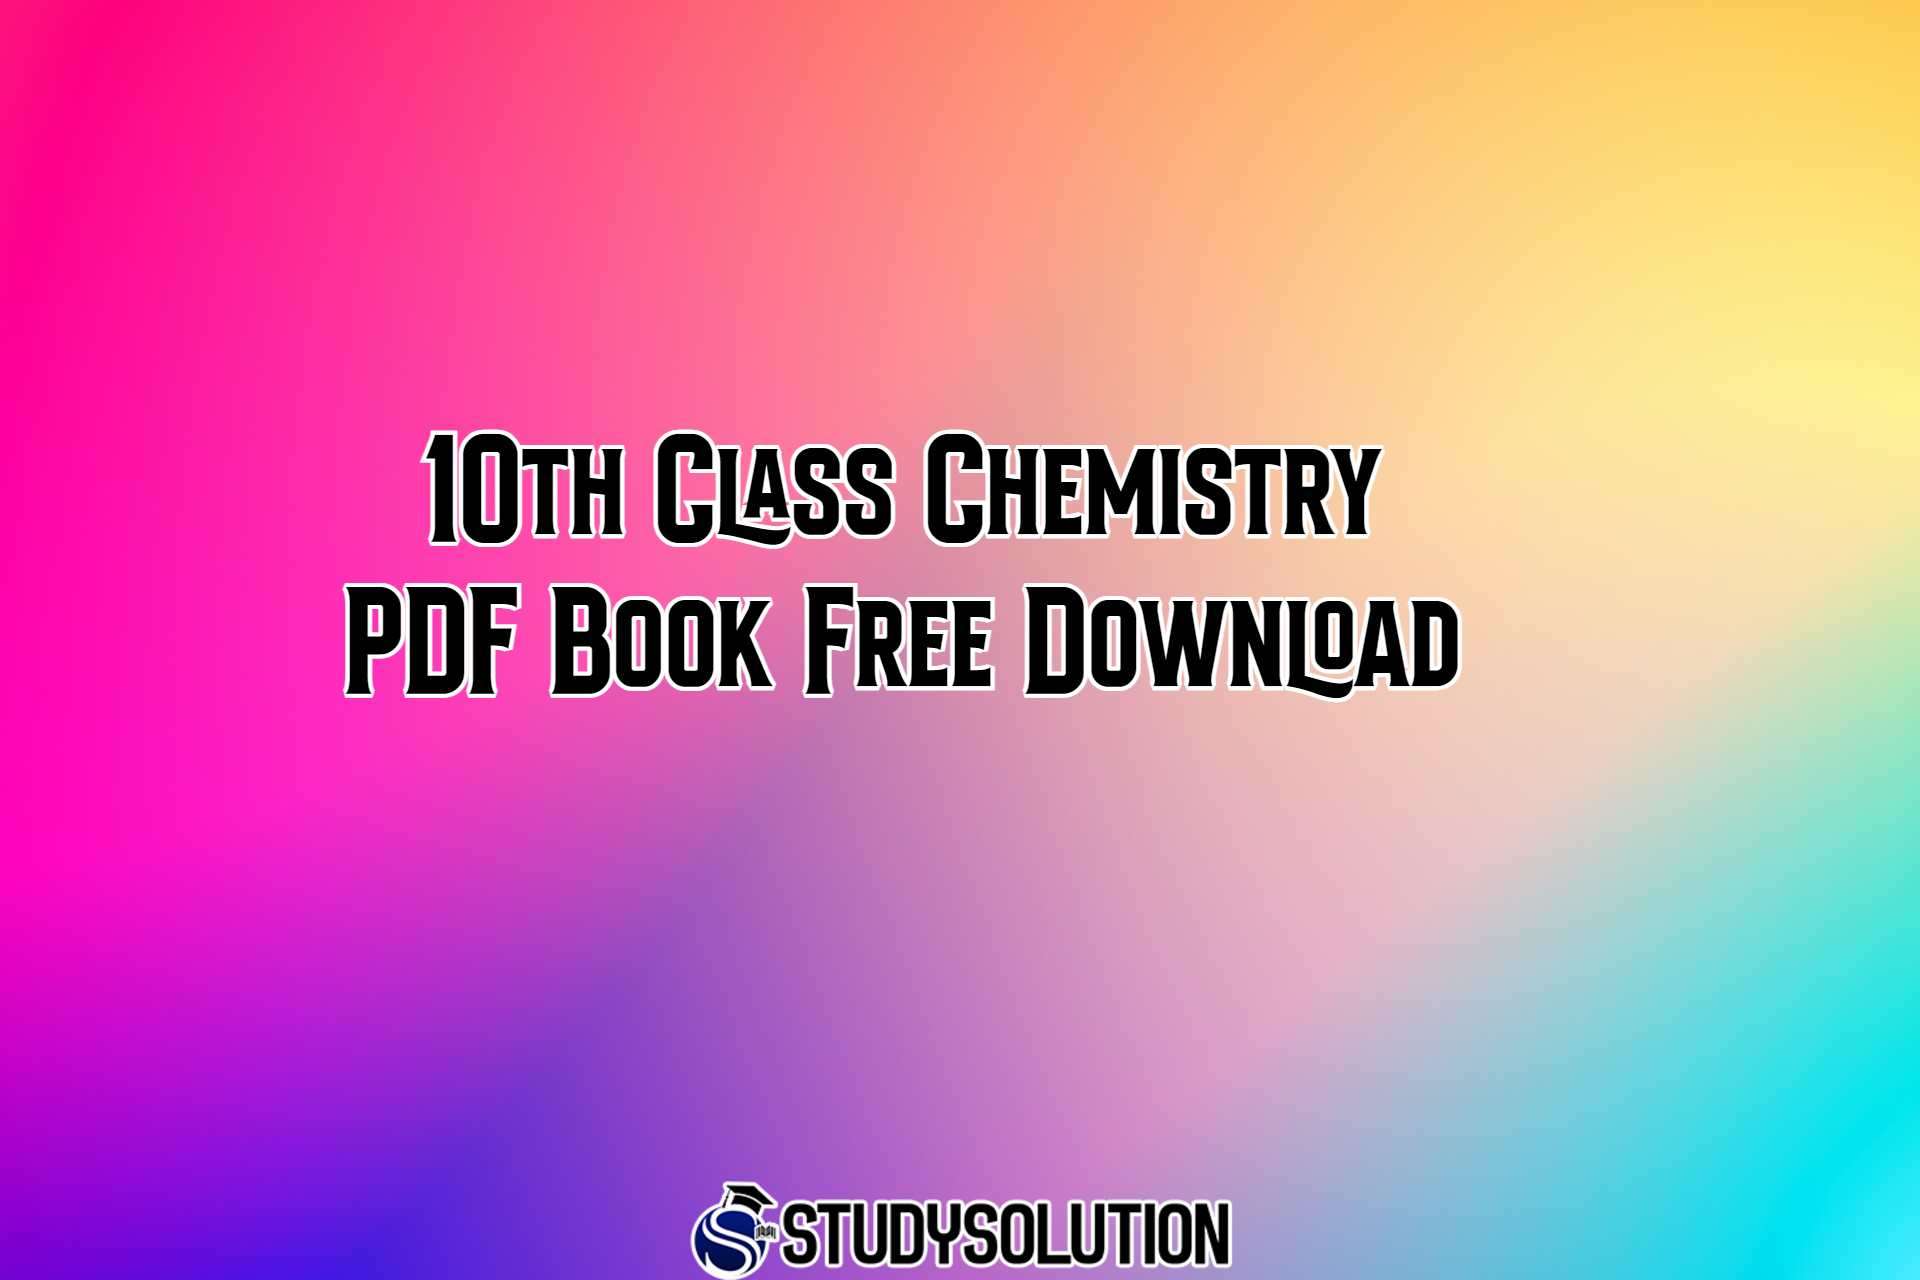 10th Class Chemistry PDF Book Free Download